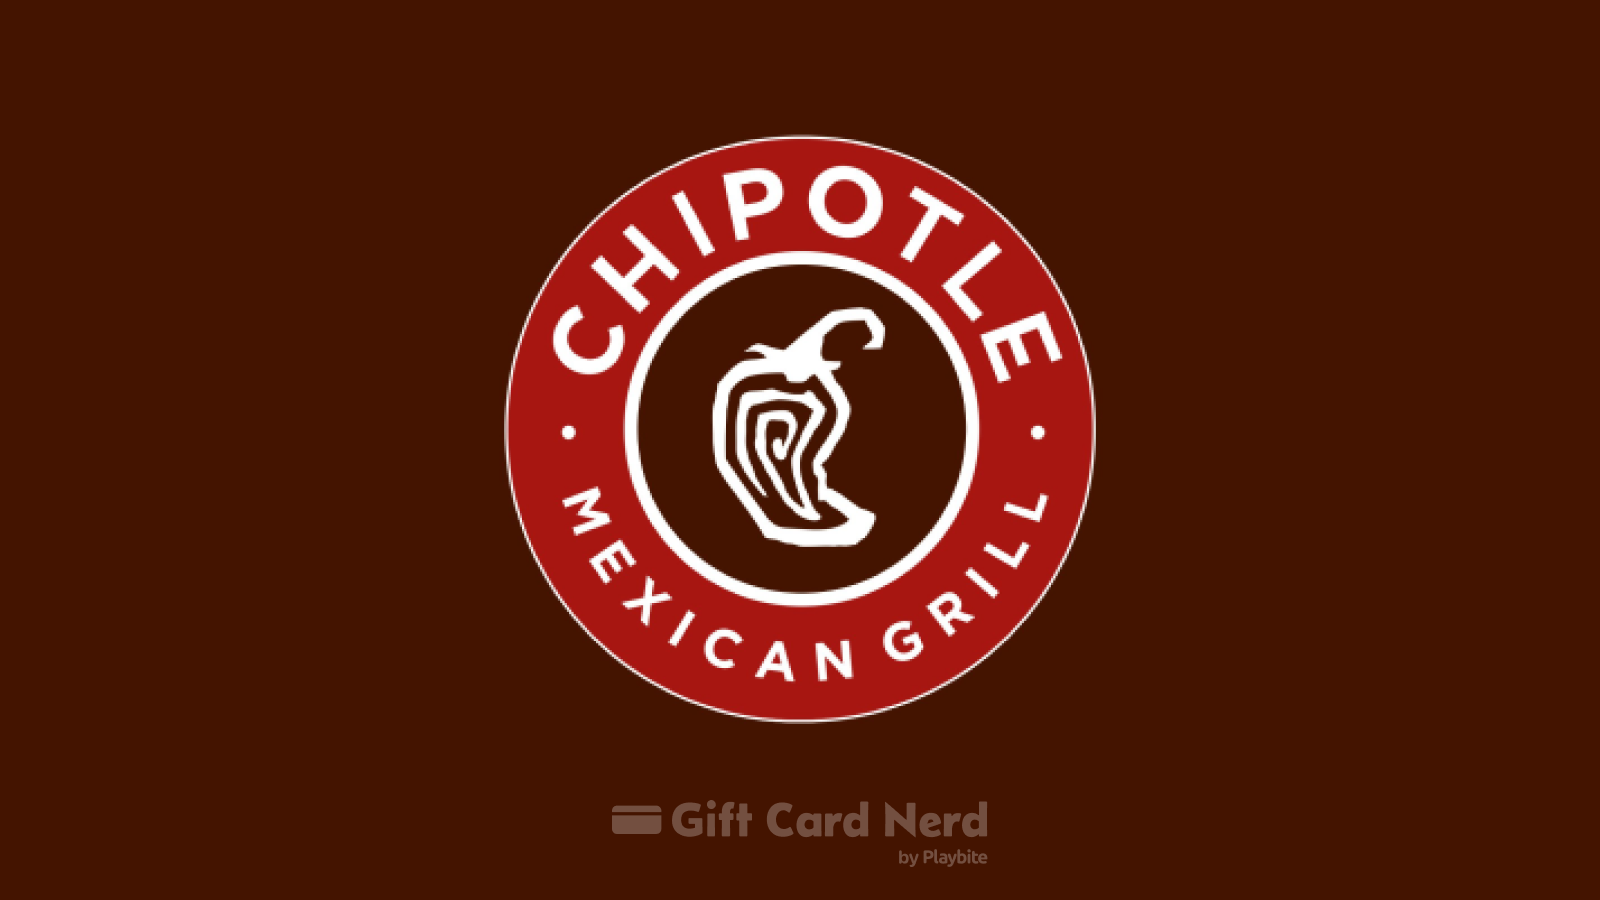 Does Amazon sell Chipotle gift cards?